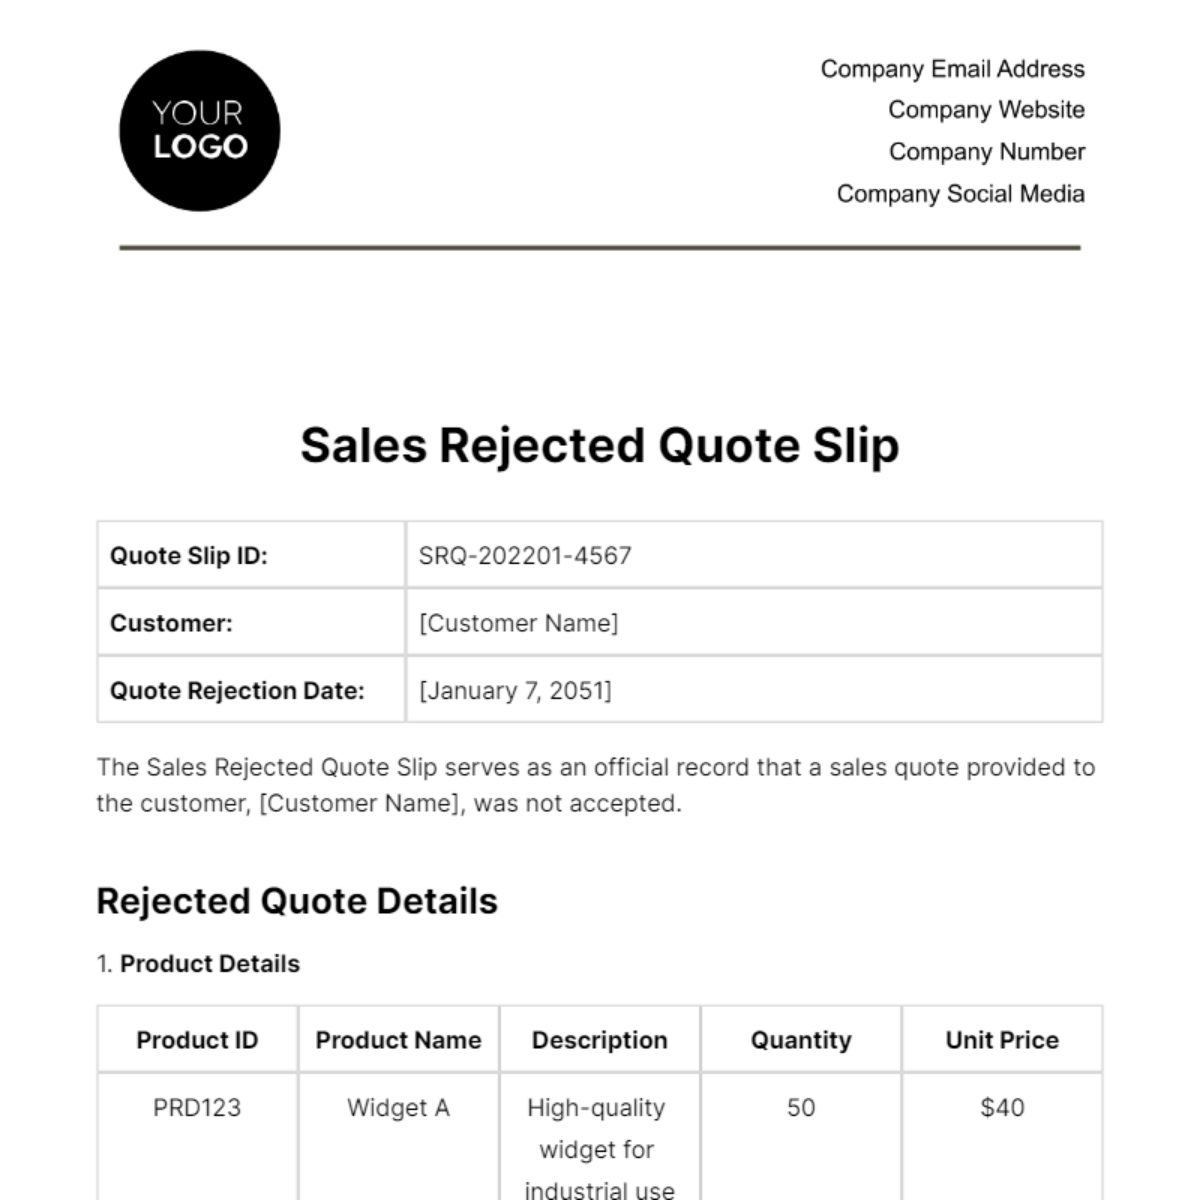 Sales Rejected Quote Slip Template